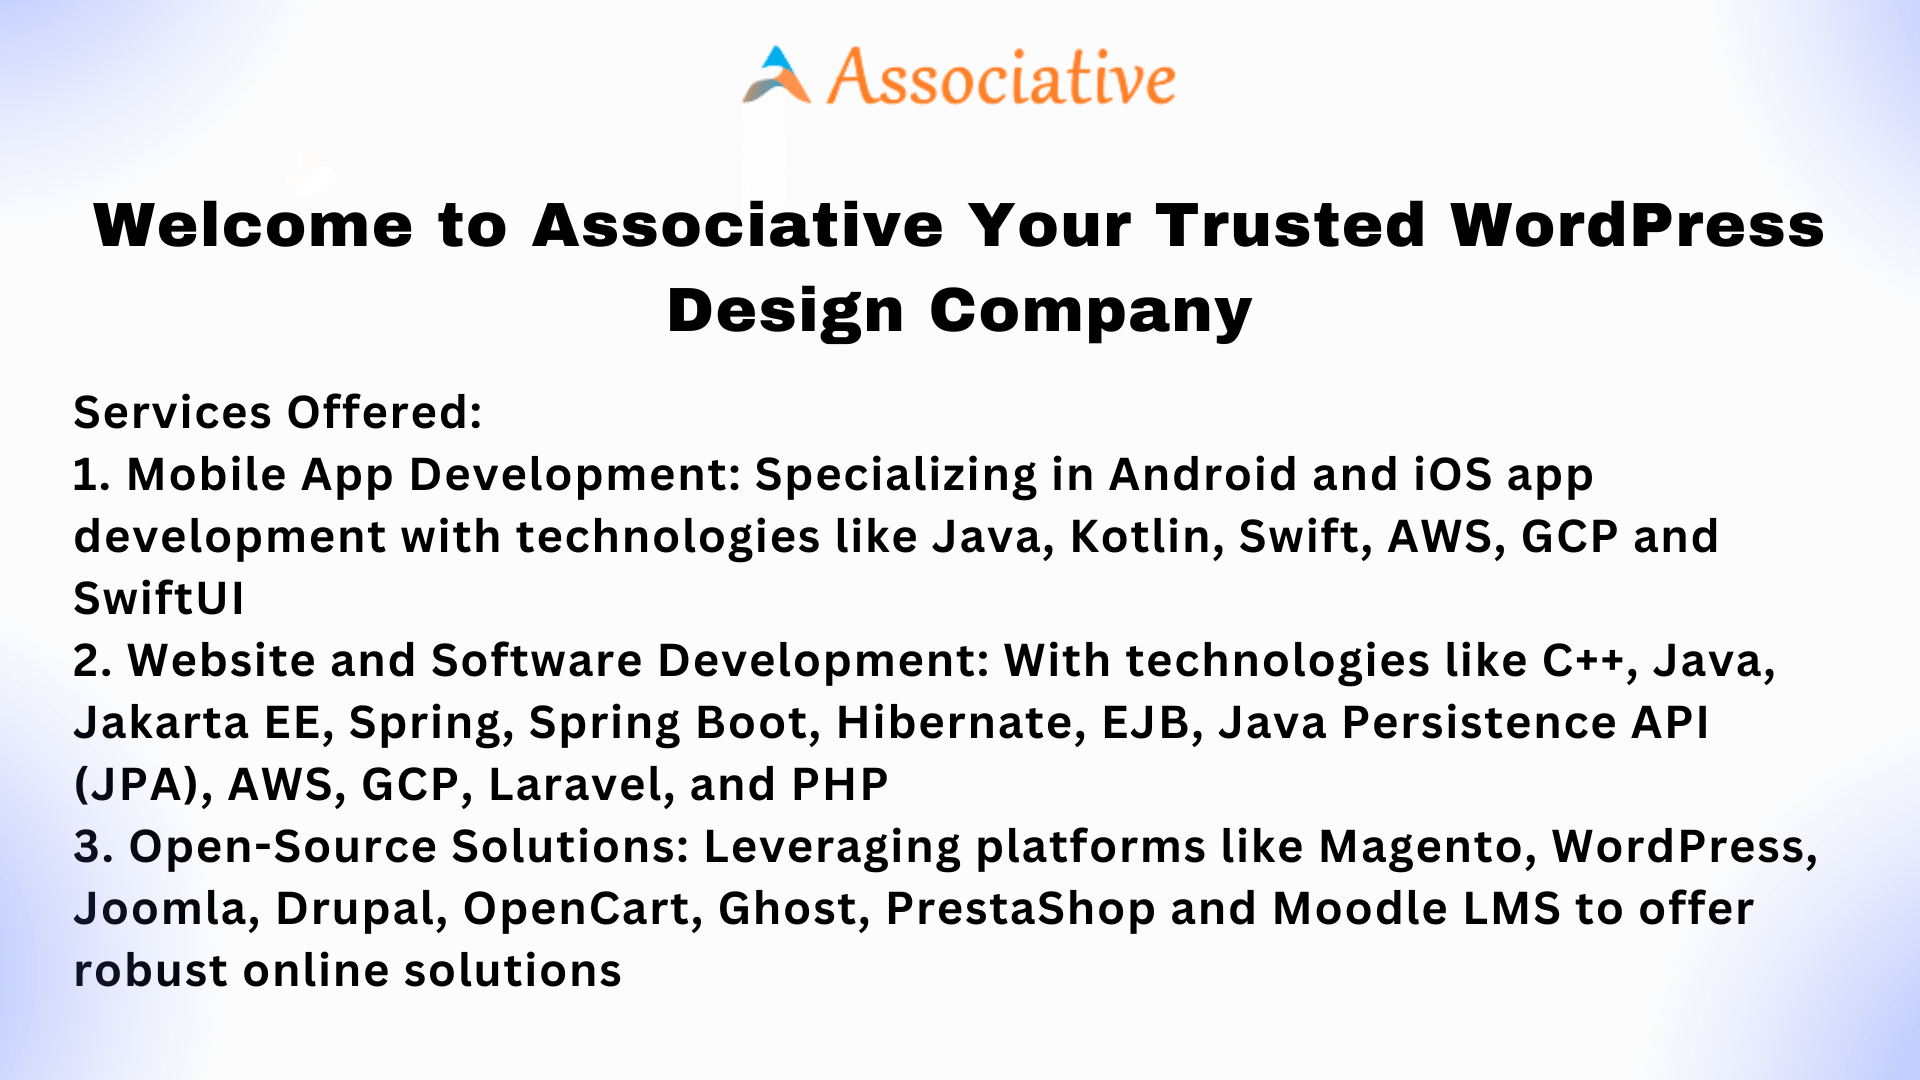 Welcome to Associative Your Trusted WordPress Design Company